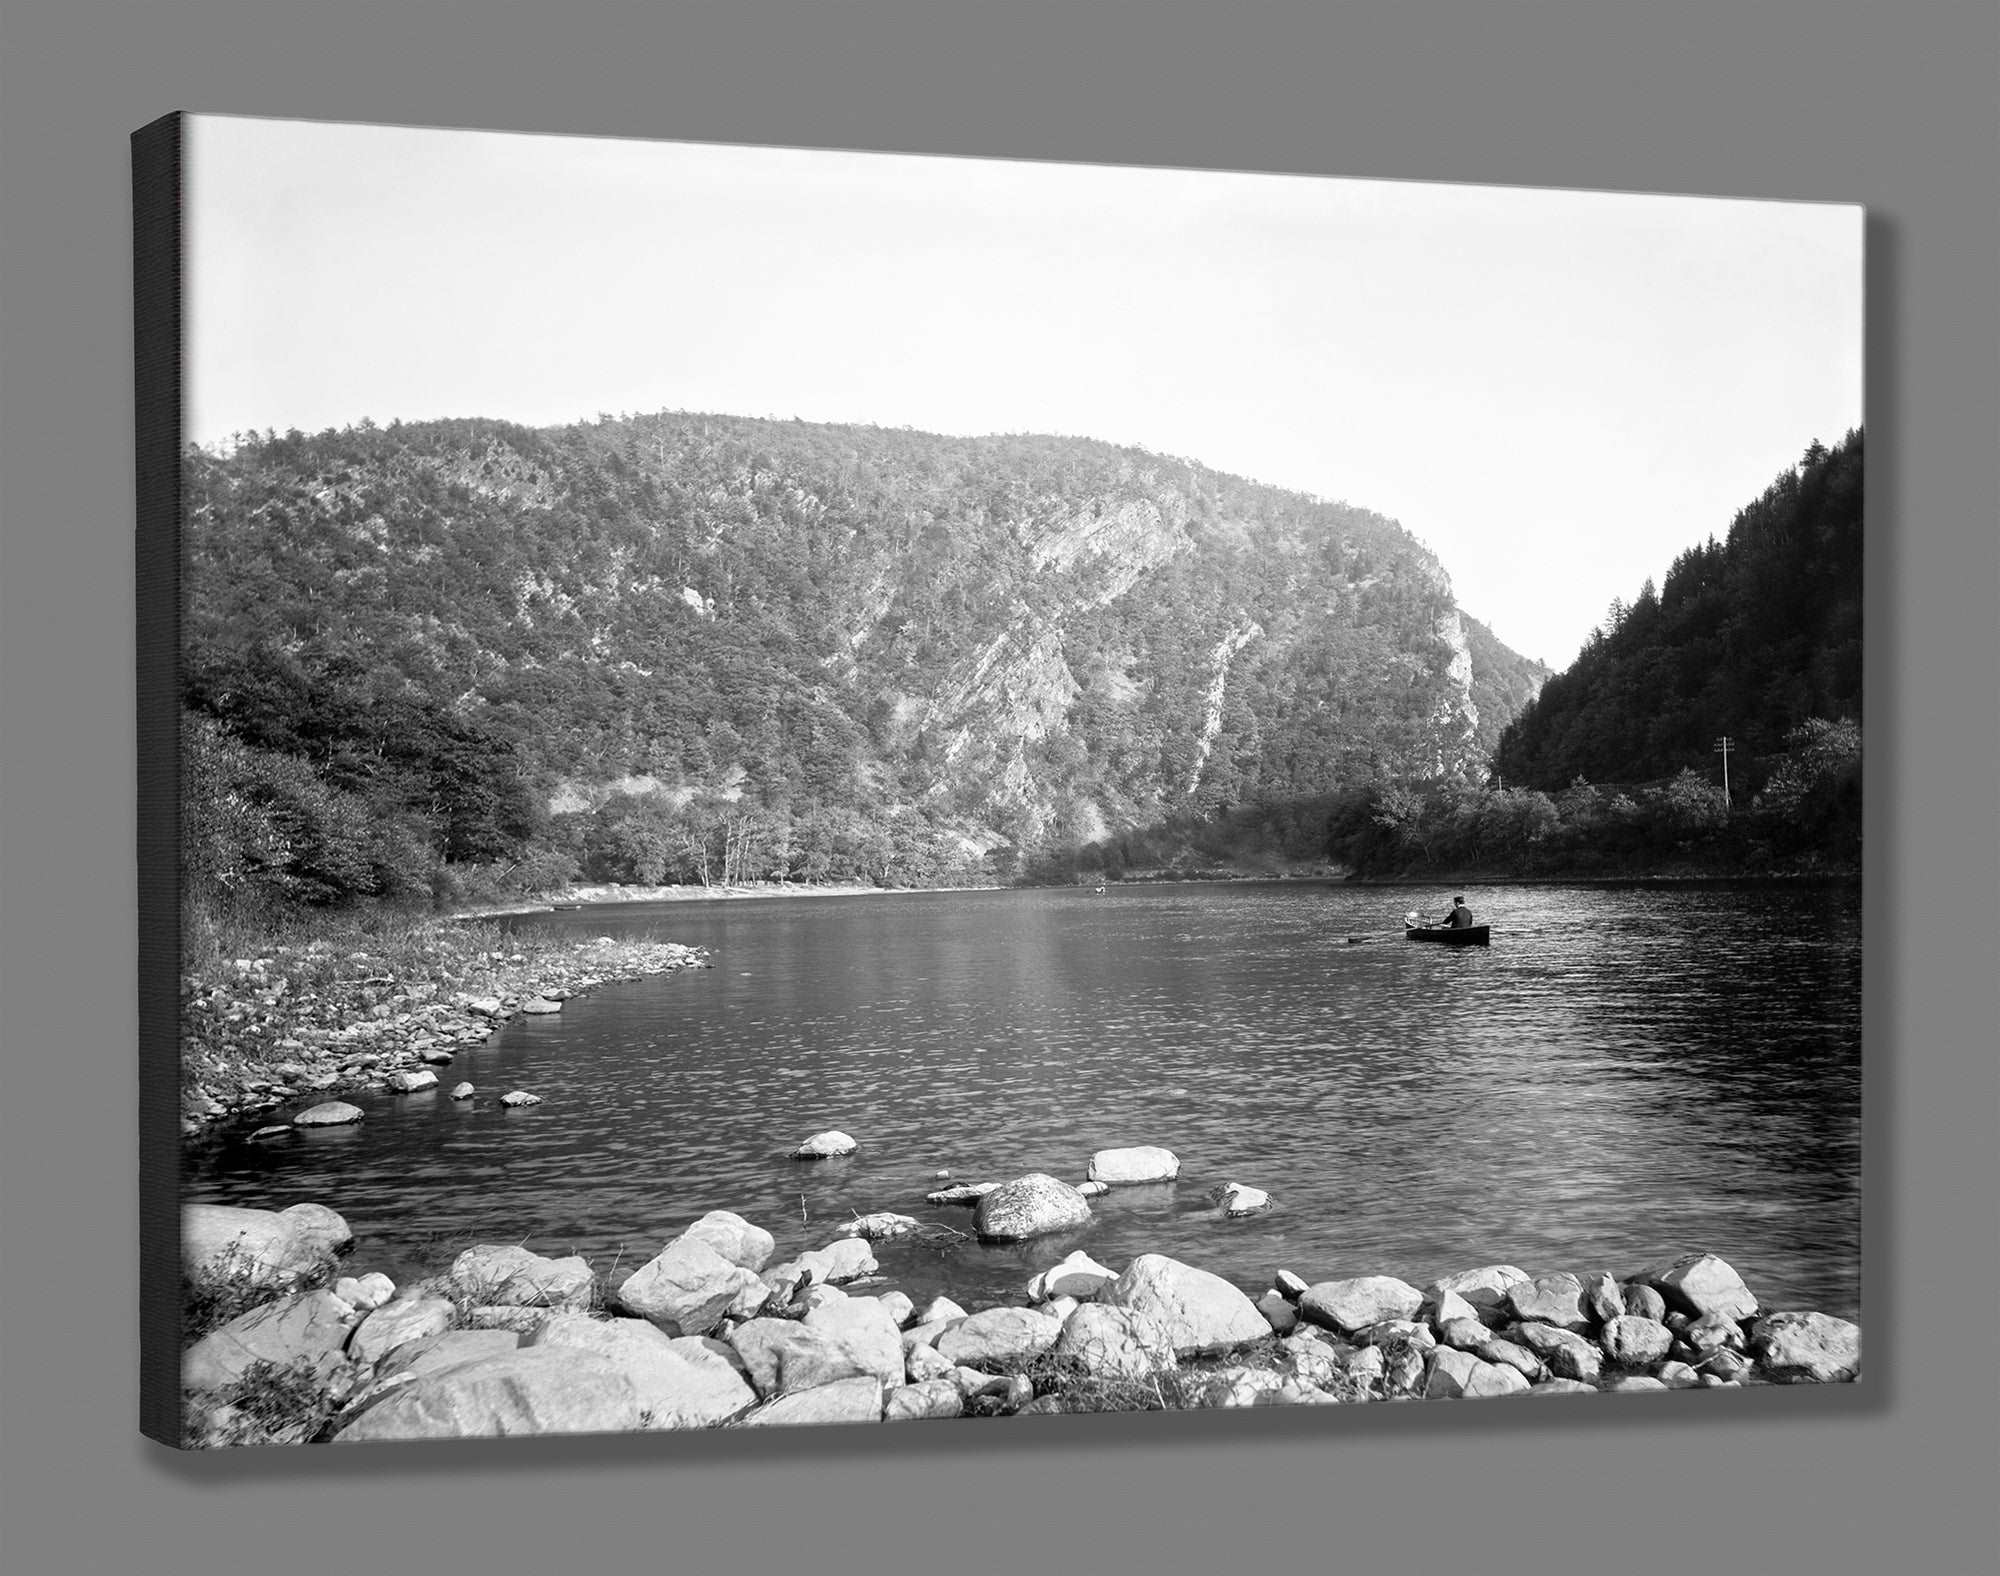 A canvas print reproduction of vintage photography of a canoer on the Delaware Water Gap